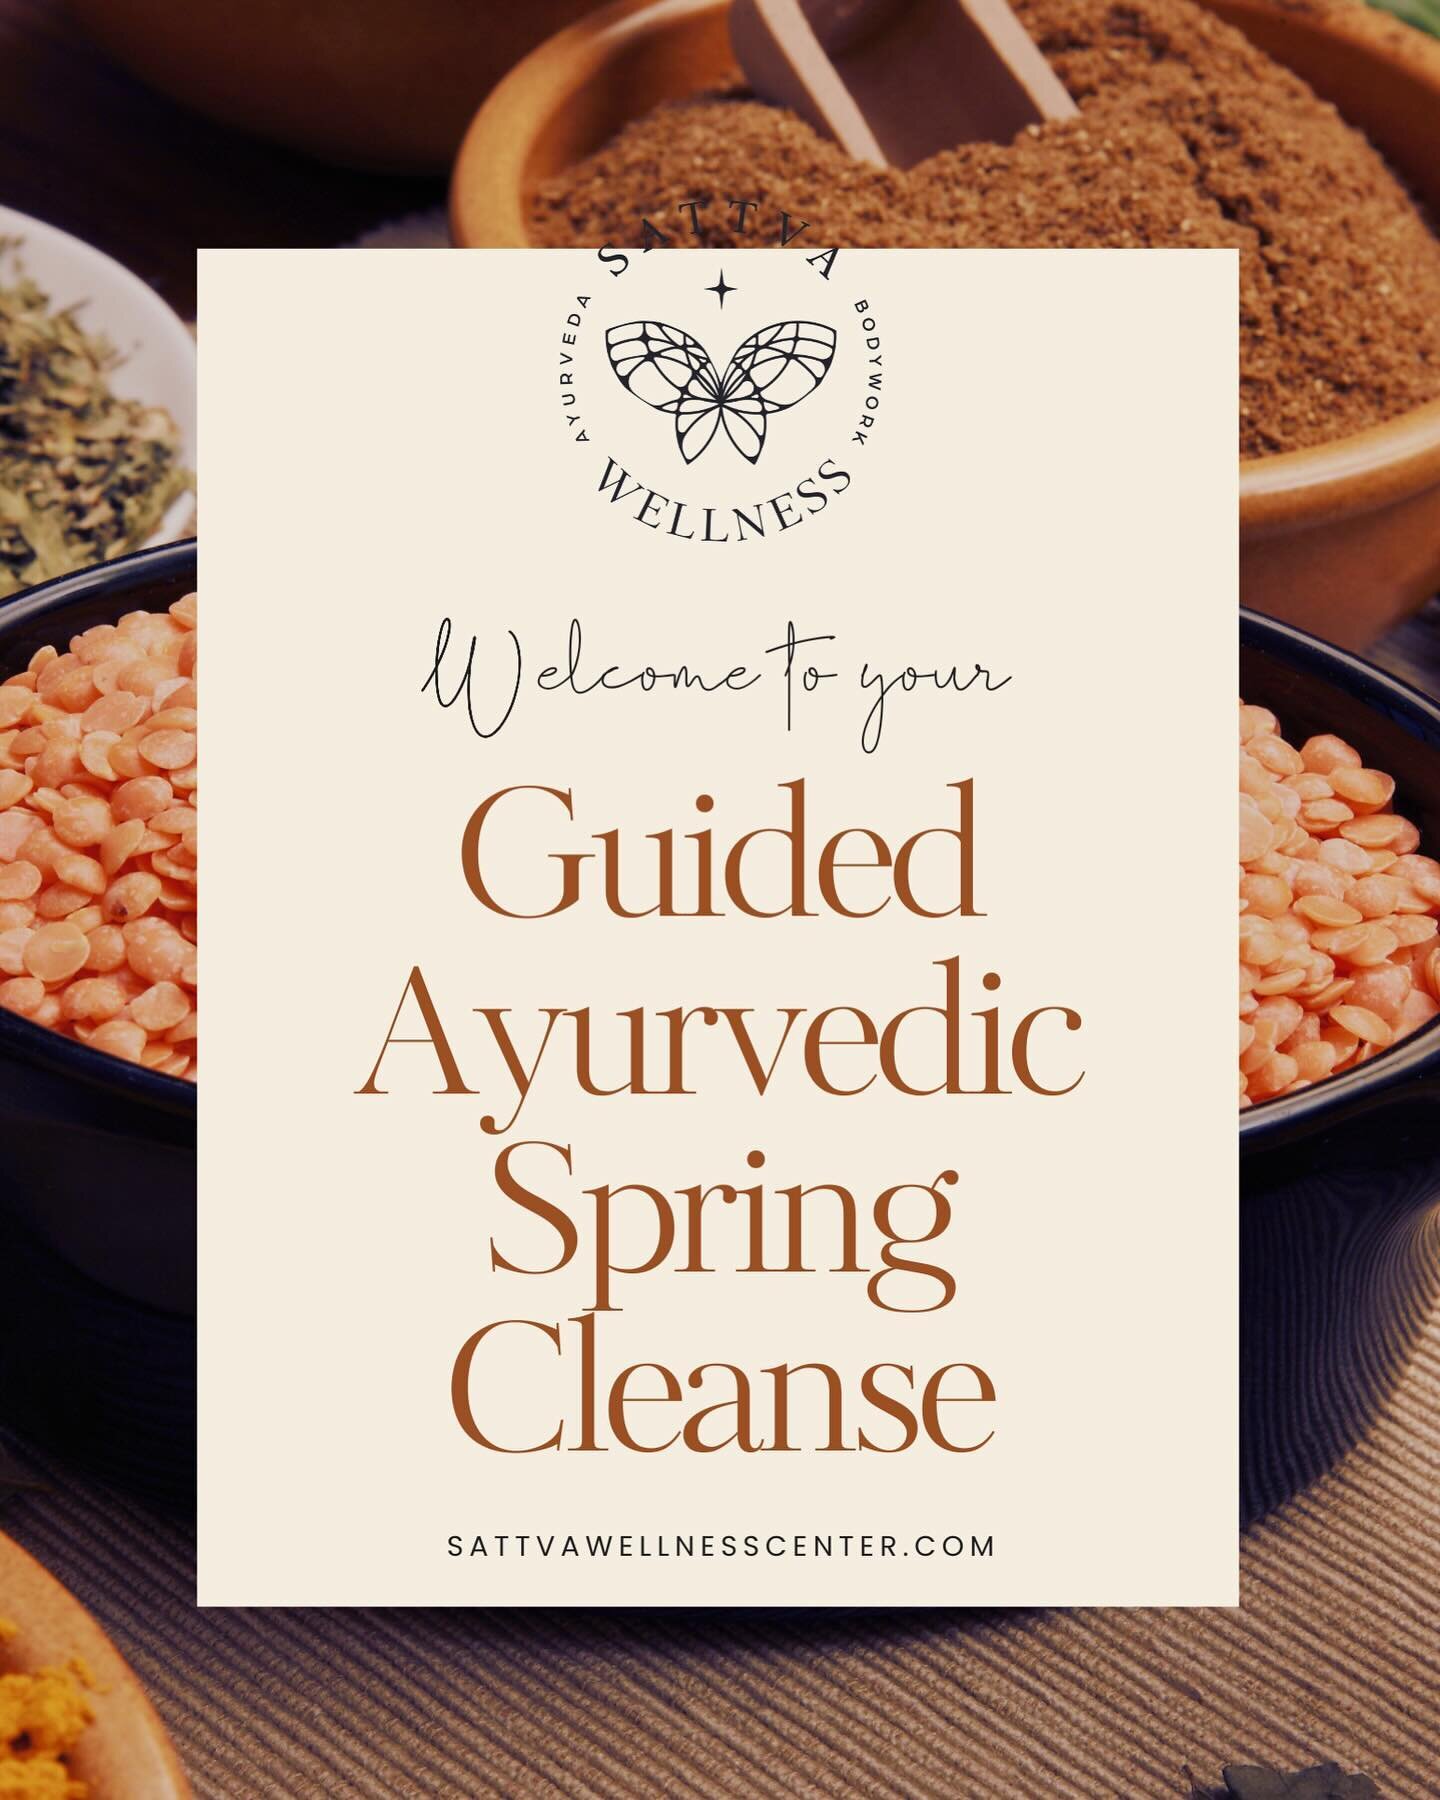 🌿✨ Spring into Renewal with the Sattva Ayurvedic Spring Cleanse 🌸💫

This spring, we&rsquo;re inviting you to a transformative journey that aligns with the energy of Beltane. Embark on our 10-day Sattva Ayurvedic Spring Cleanse, starting May 1st, d